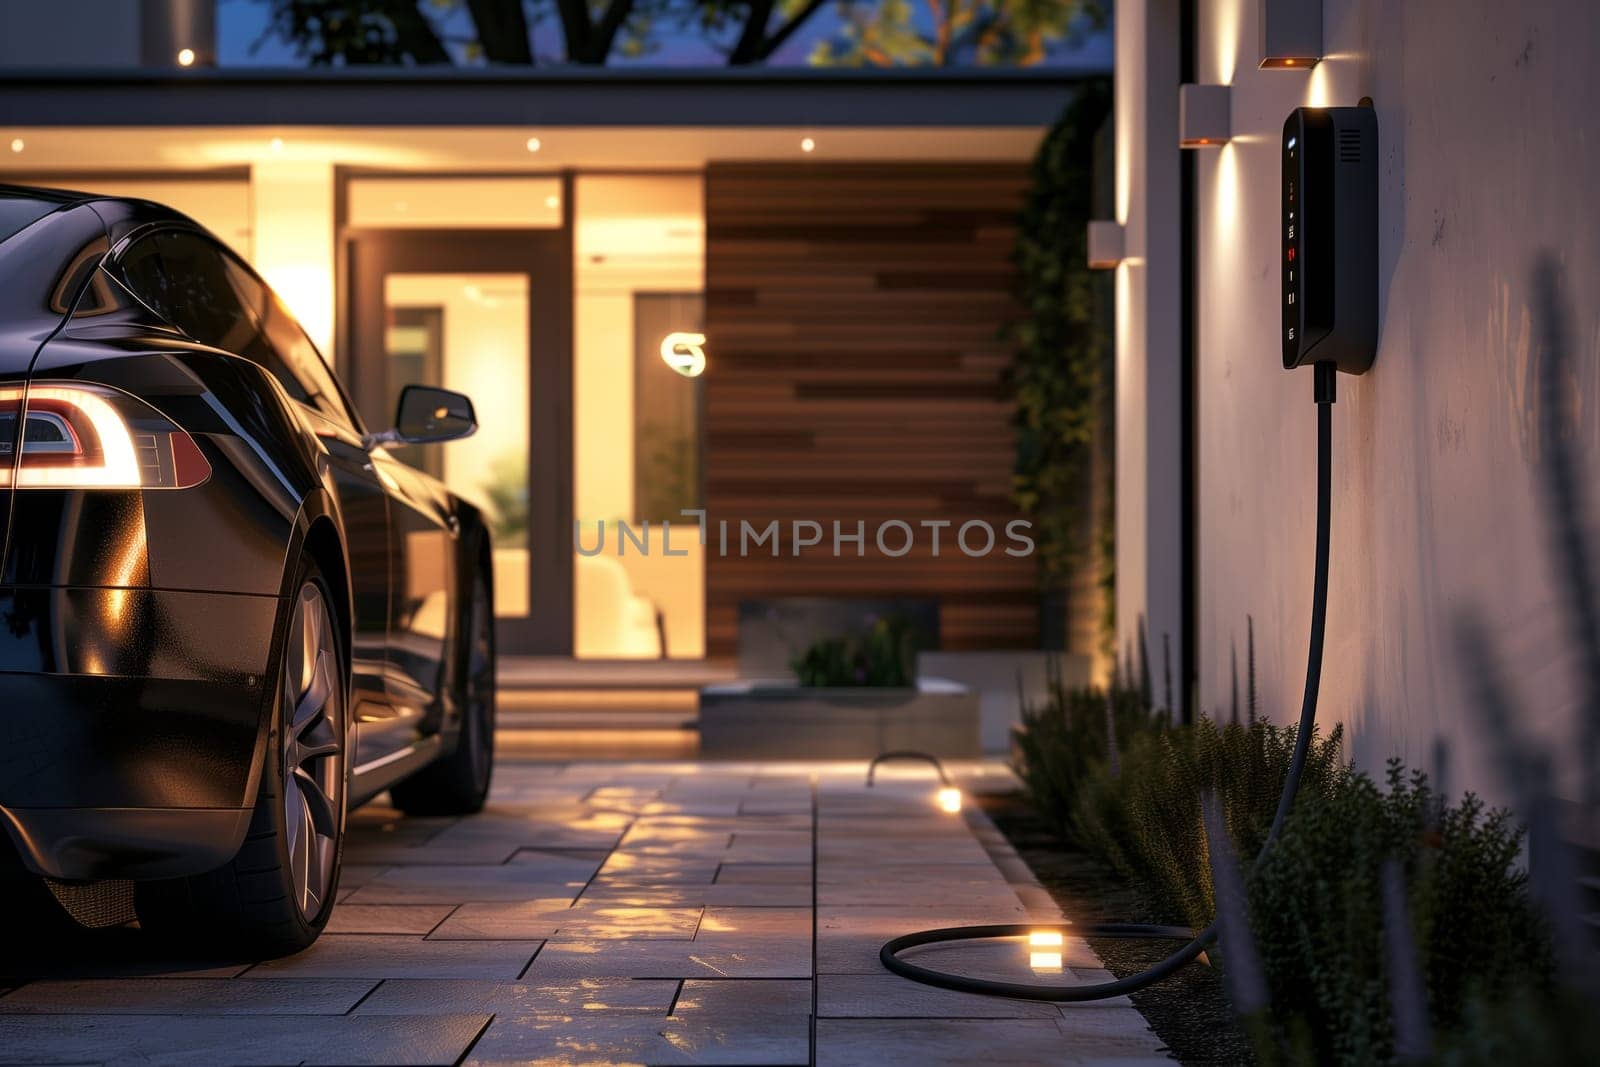 A Tesla Model S is parked in front of a house, charging at a station. The vehicles automotive tires, lights, and wood door are visible